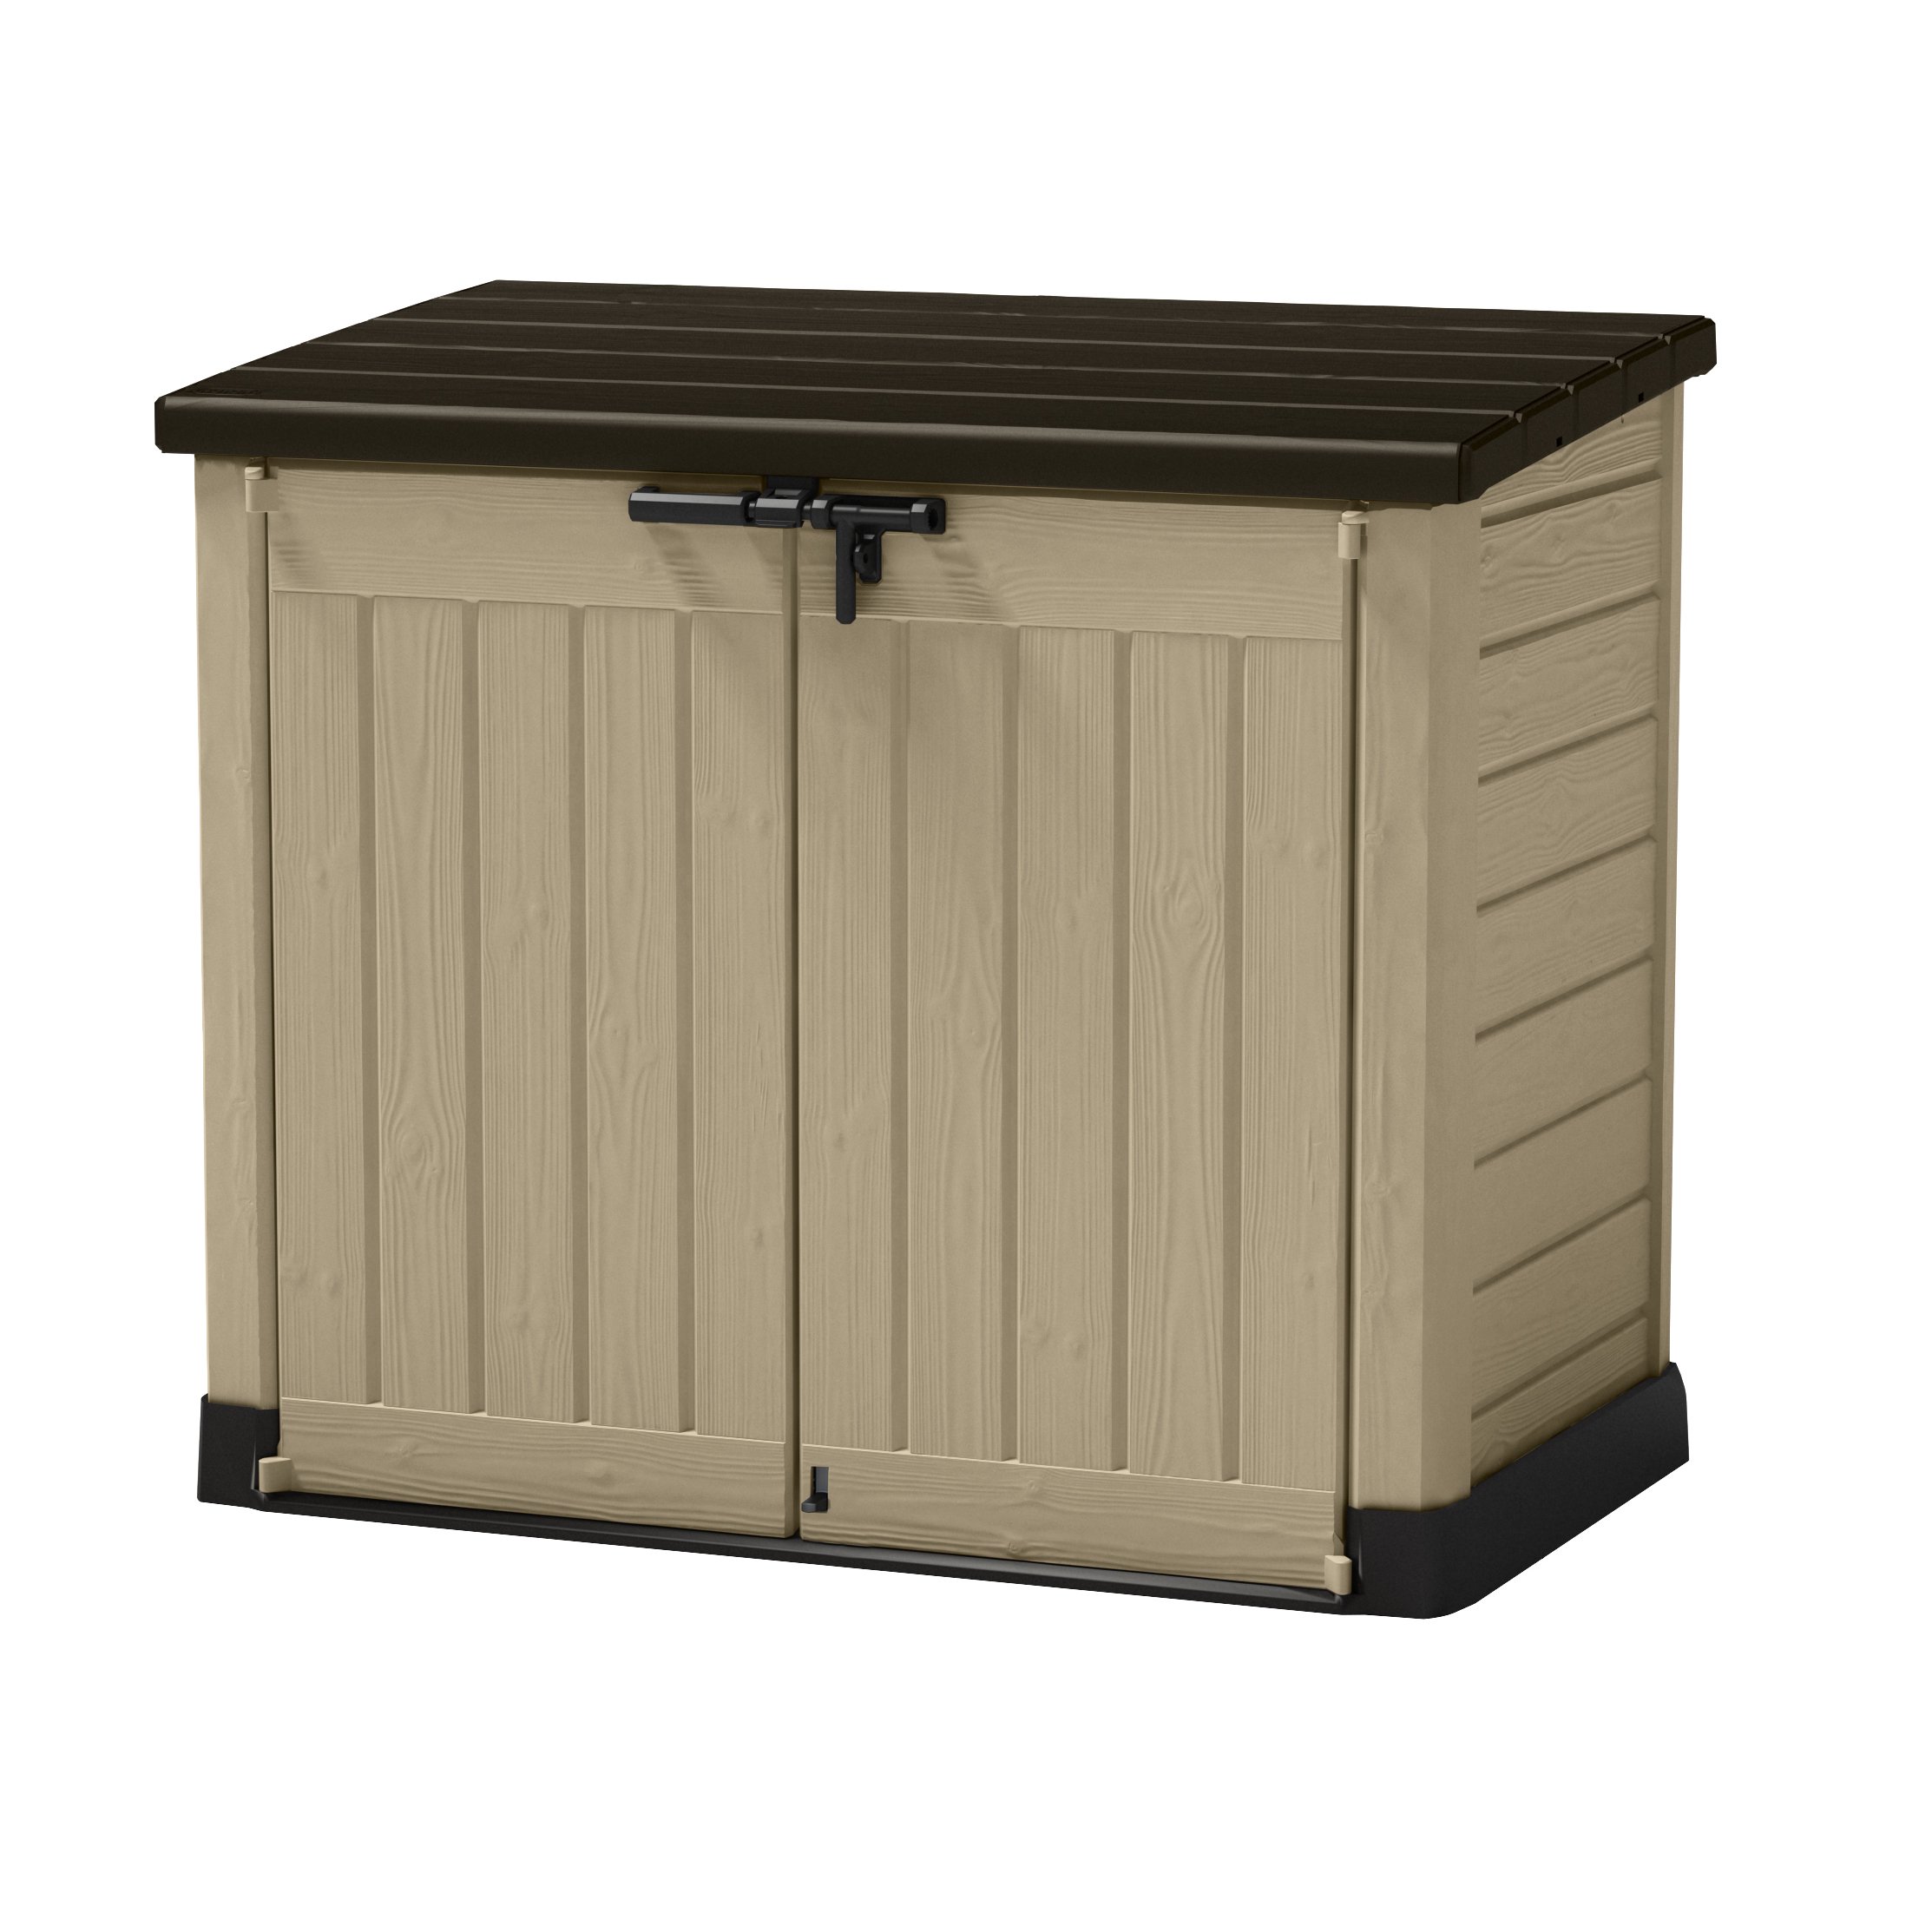 Shop Keter Store-It-Out Max Beige, Brown Resin Outdoor Horizontal Garden  Storage Shed - Free Shipping Today - Overstock - 12364283